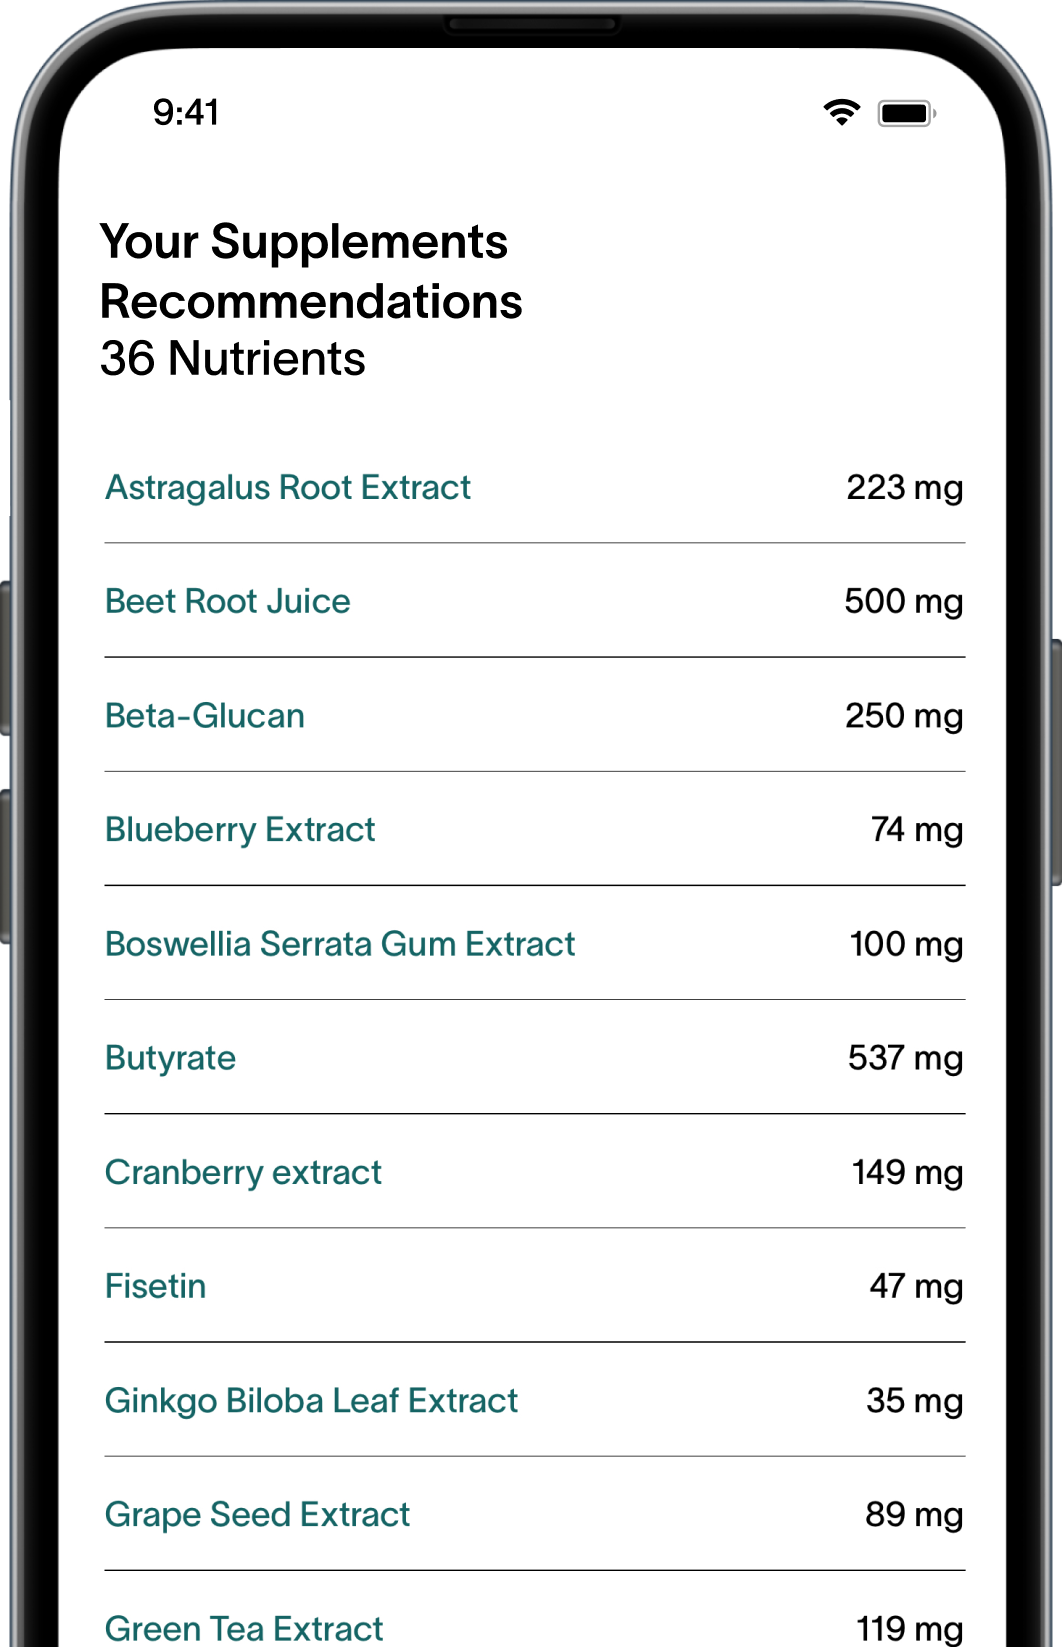 [Phone Screen] Viome App - Your Supplements Recommendations